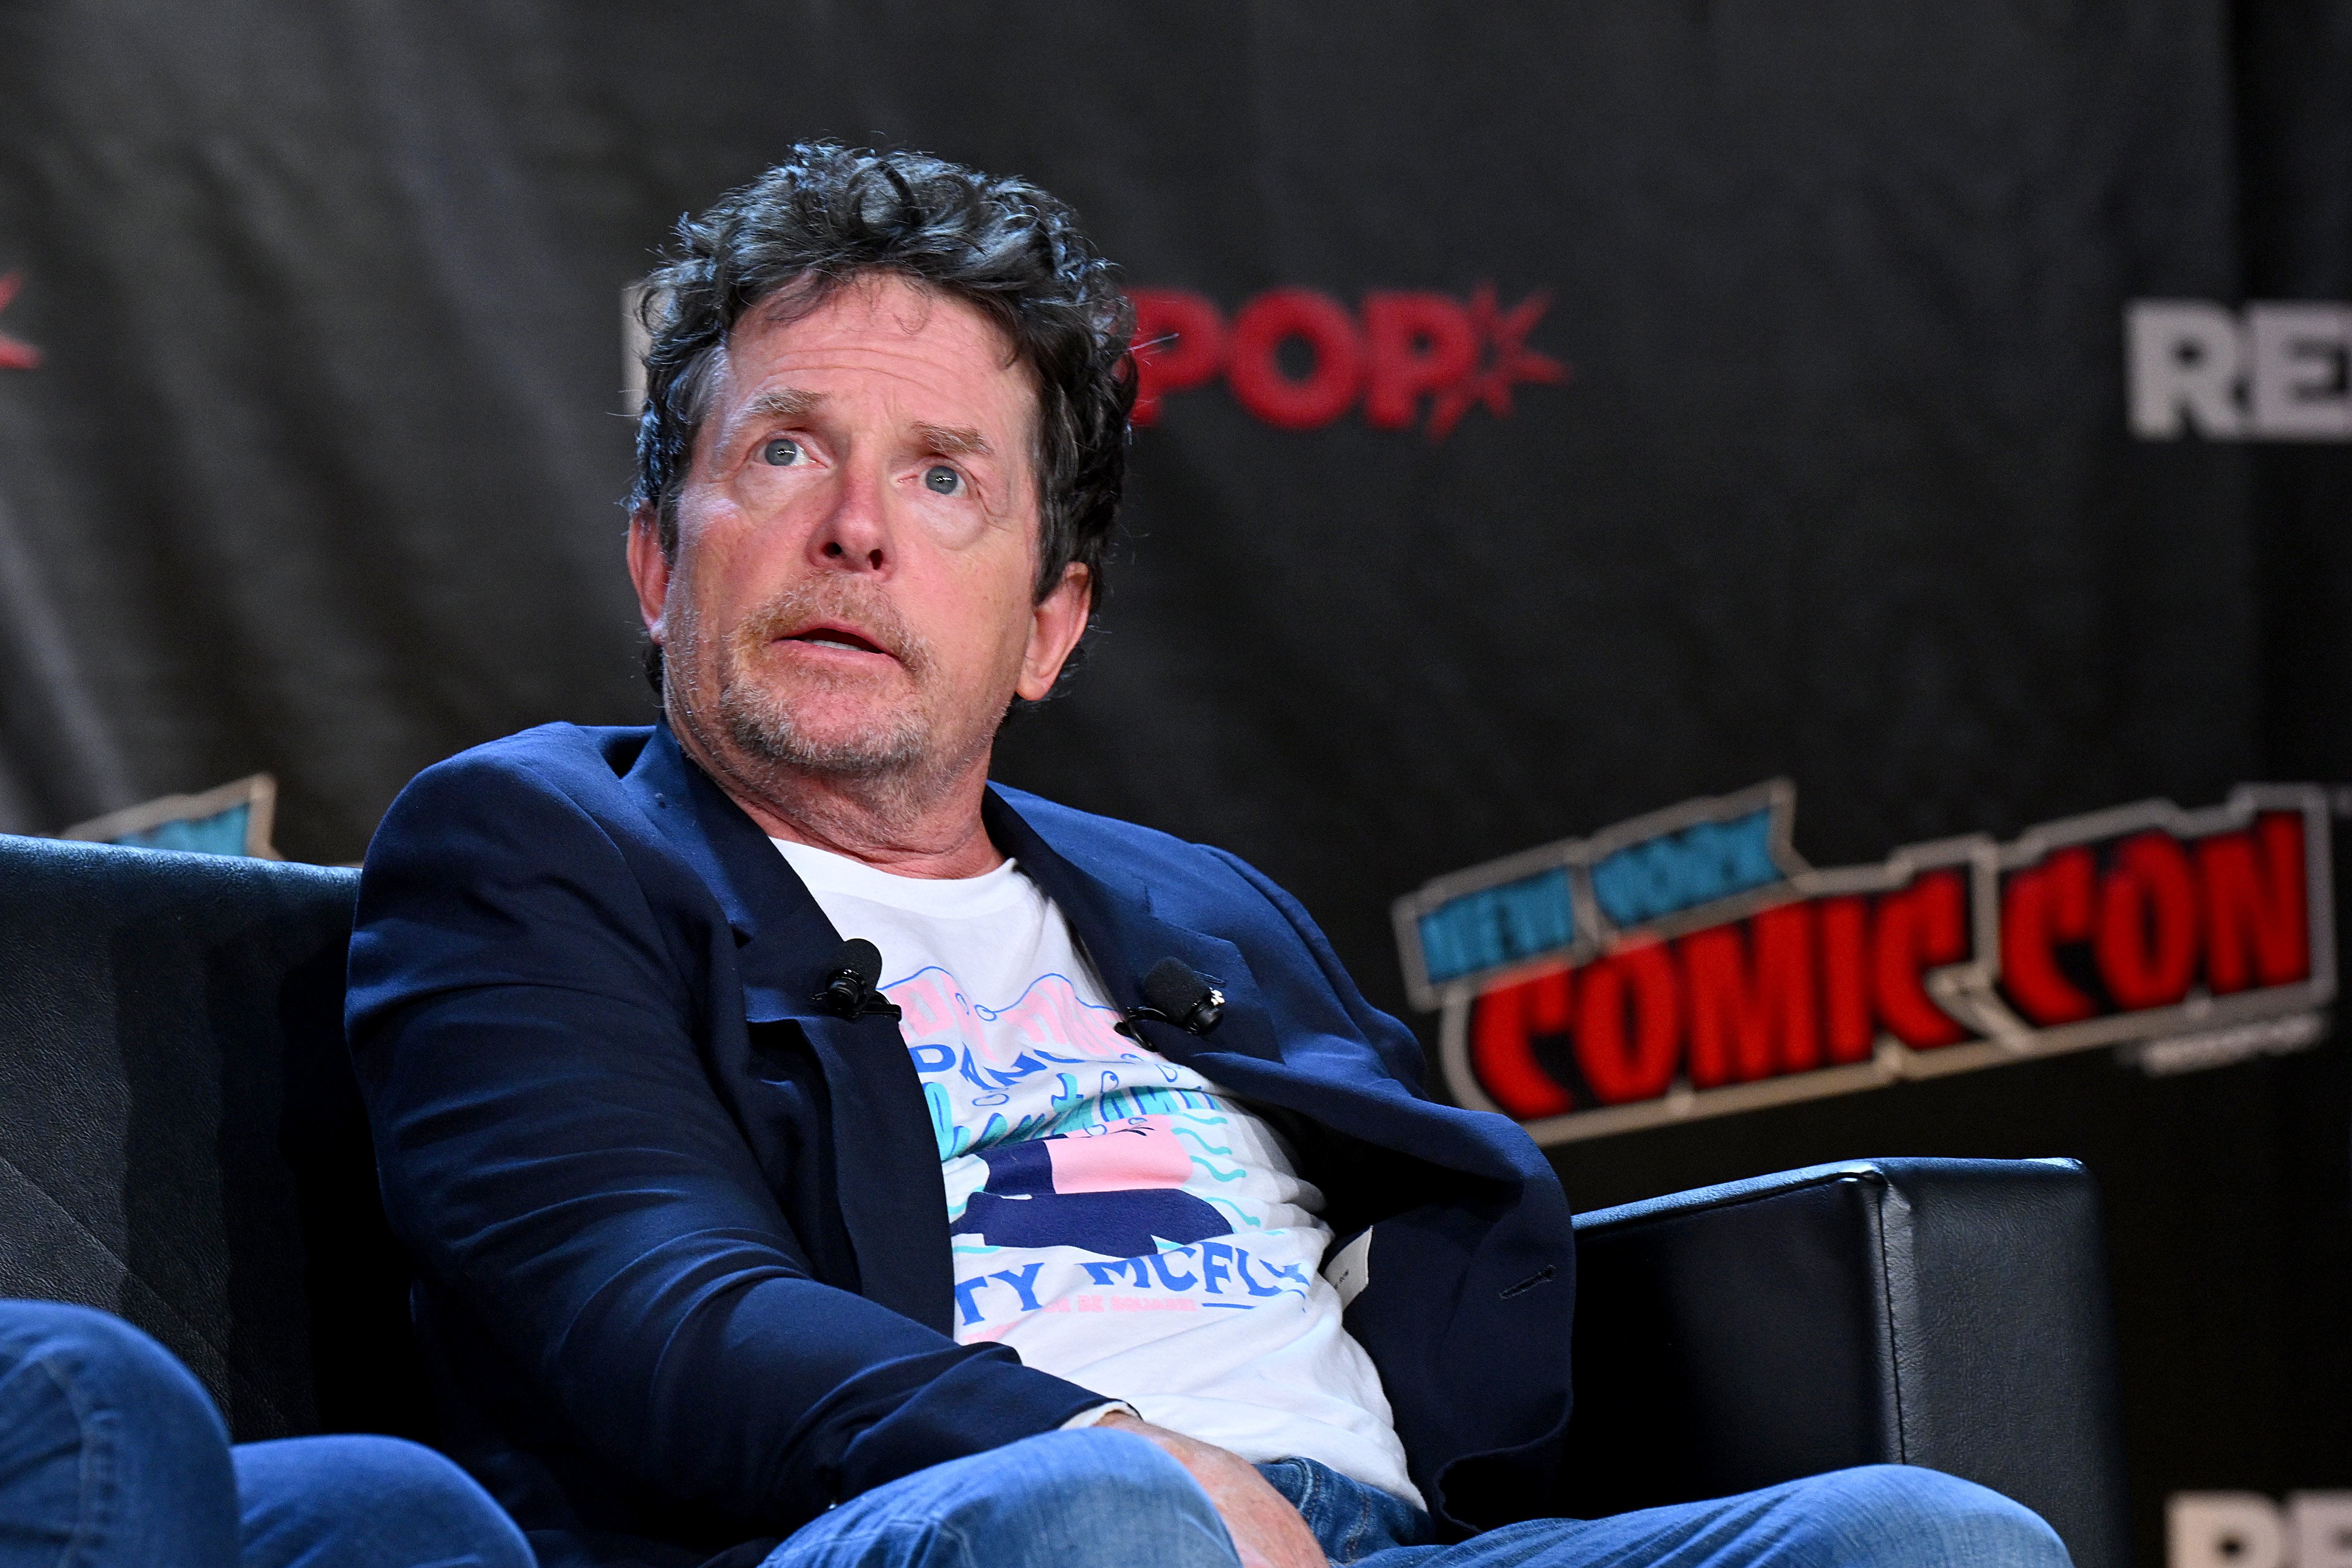 Michael J. Fox onstage at the "Back to the Future" Reunion during New York Comic Con on October 8, 2022, in New York City | Source: Getty Images